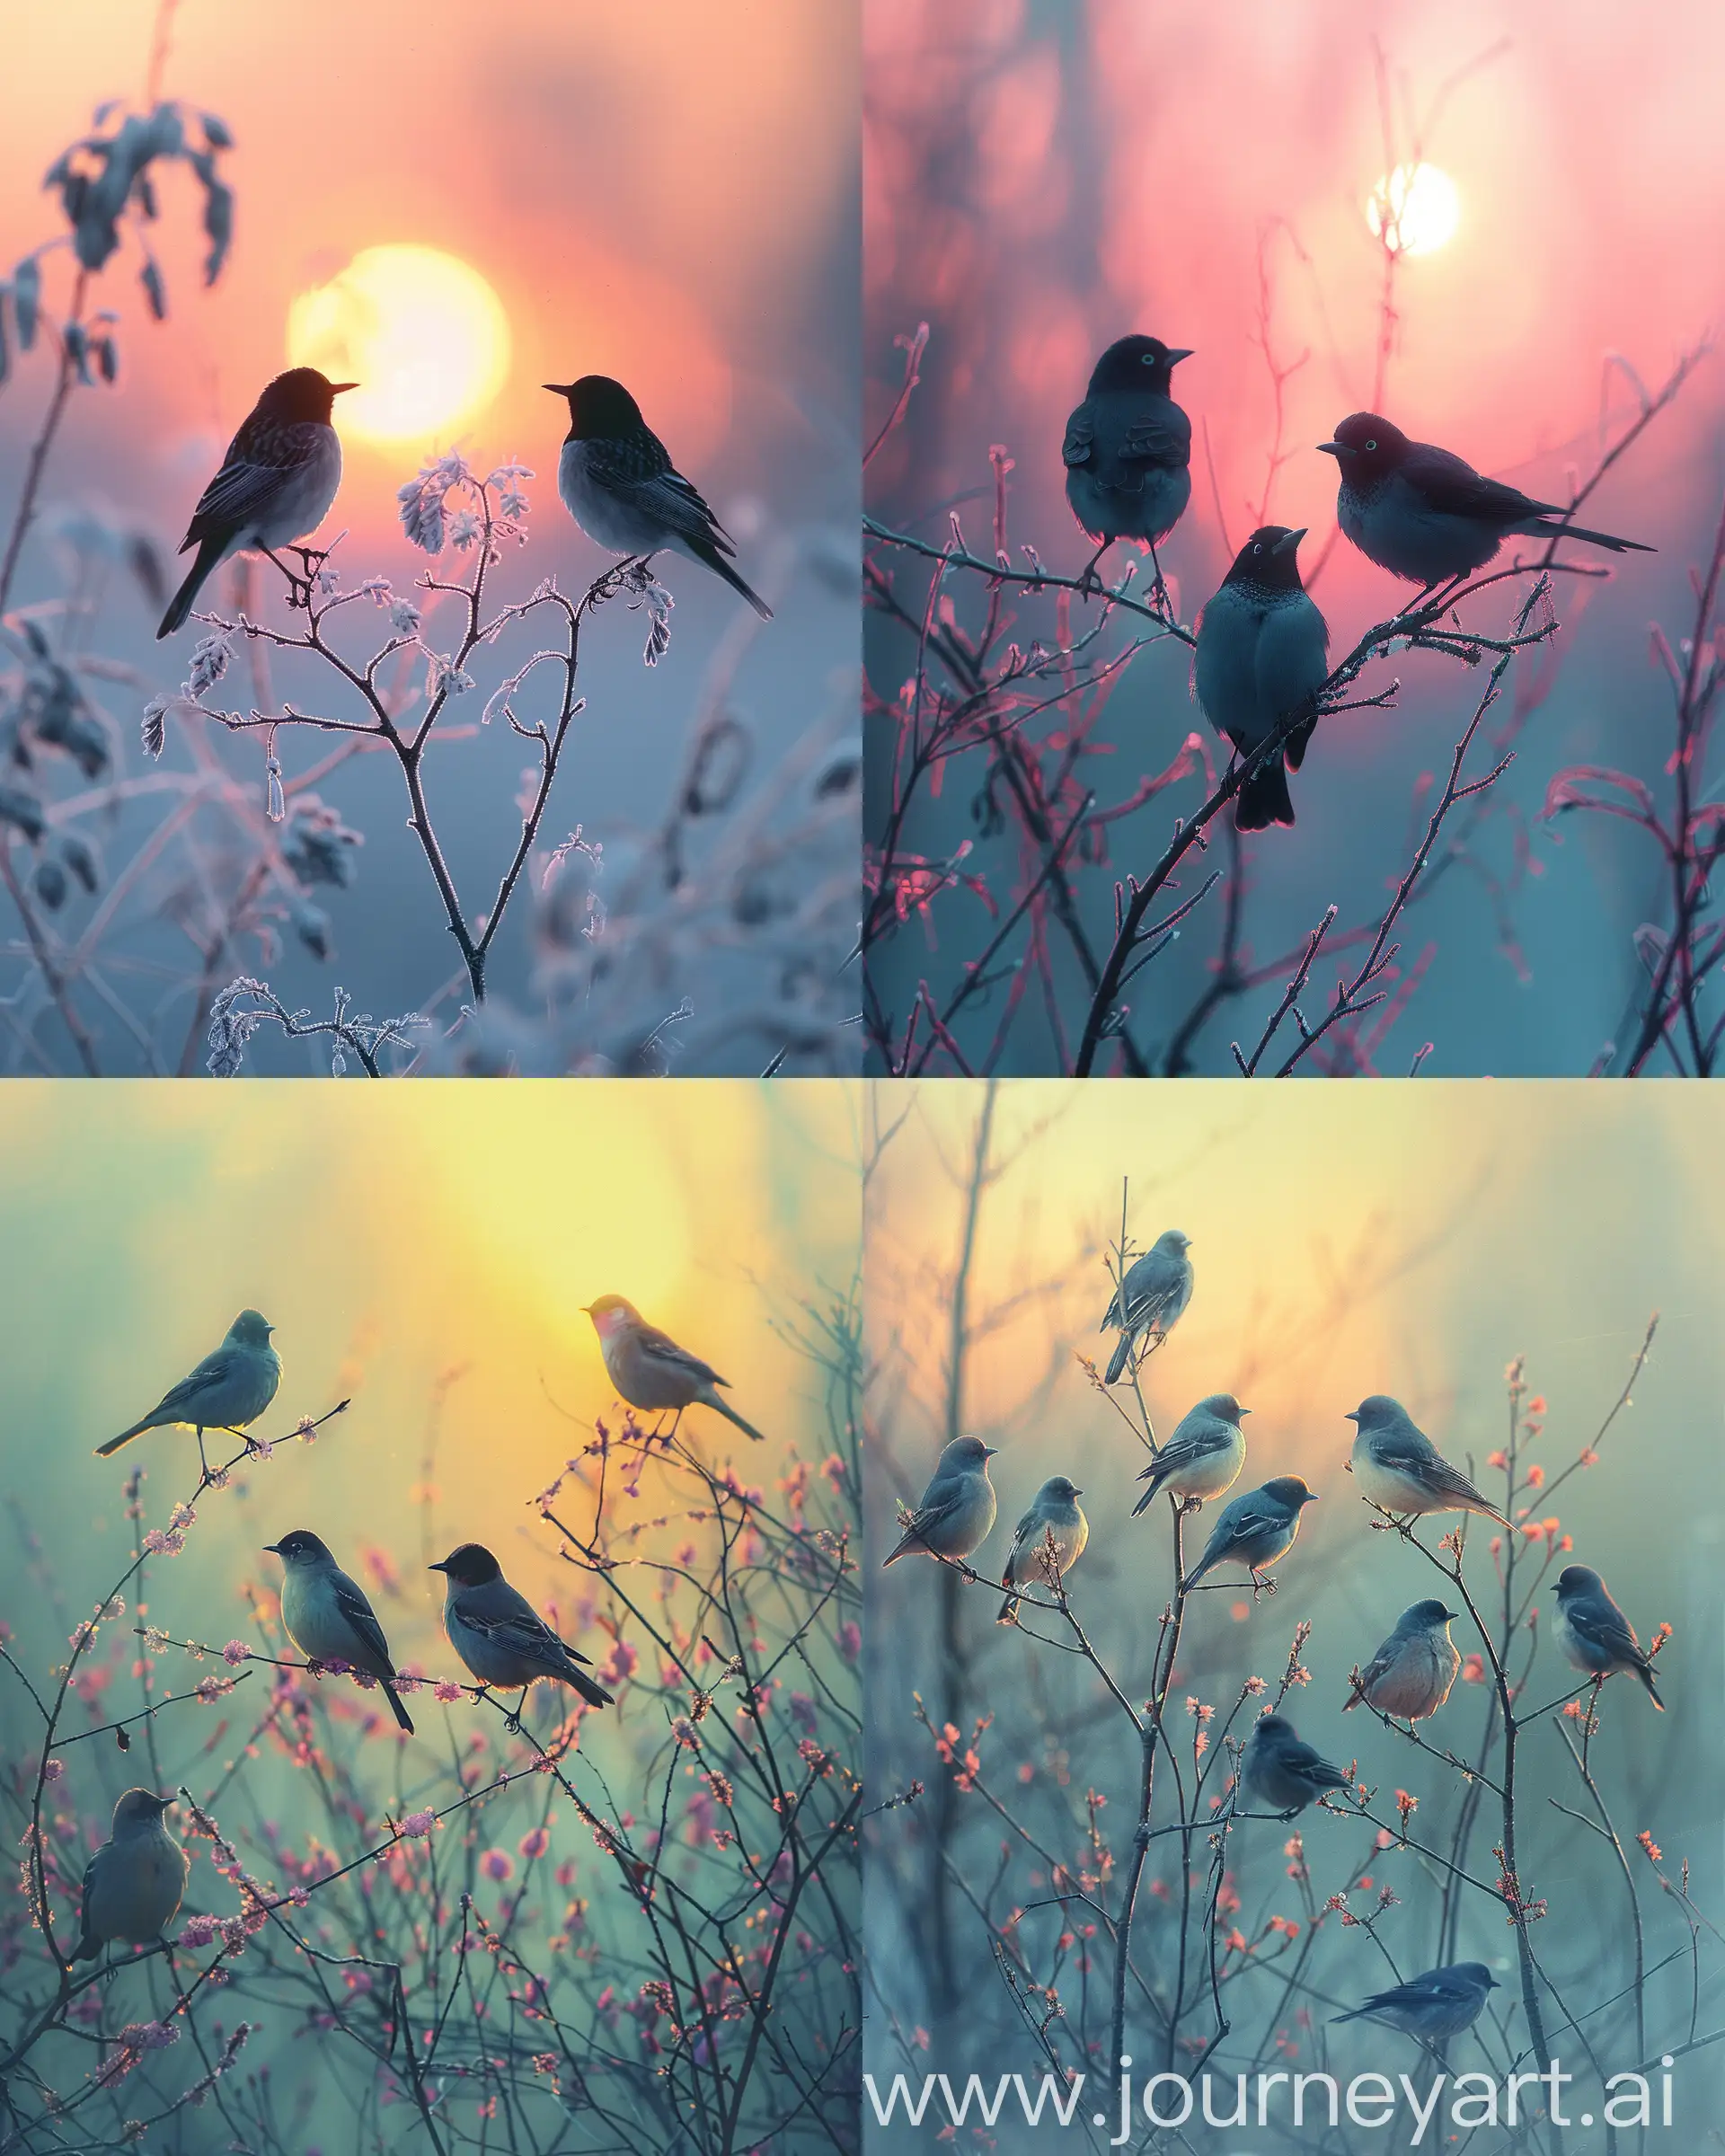  Serene Dawn Chorus, silhouette of birds on branches against the soft glow of sunrise, orchestral arrangement of nature, impressionist style, pastel colors, tranquil, Monet + Turner influences, birds as conductors of morning choir, peaceful awakening of the world --ar 4:5 --s 700 --v 6